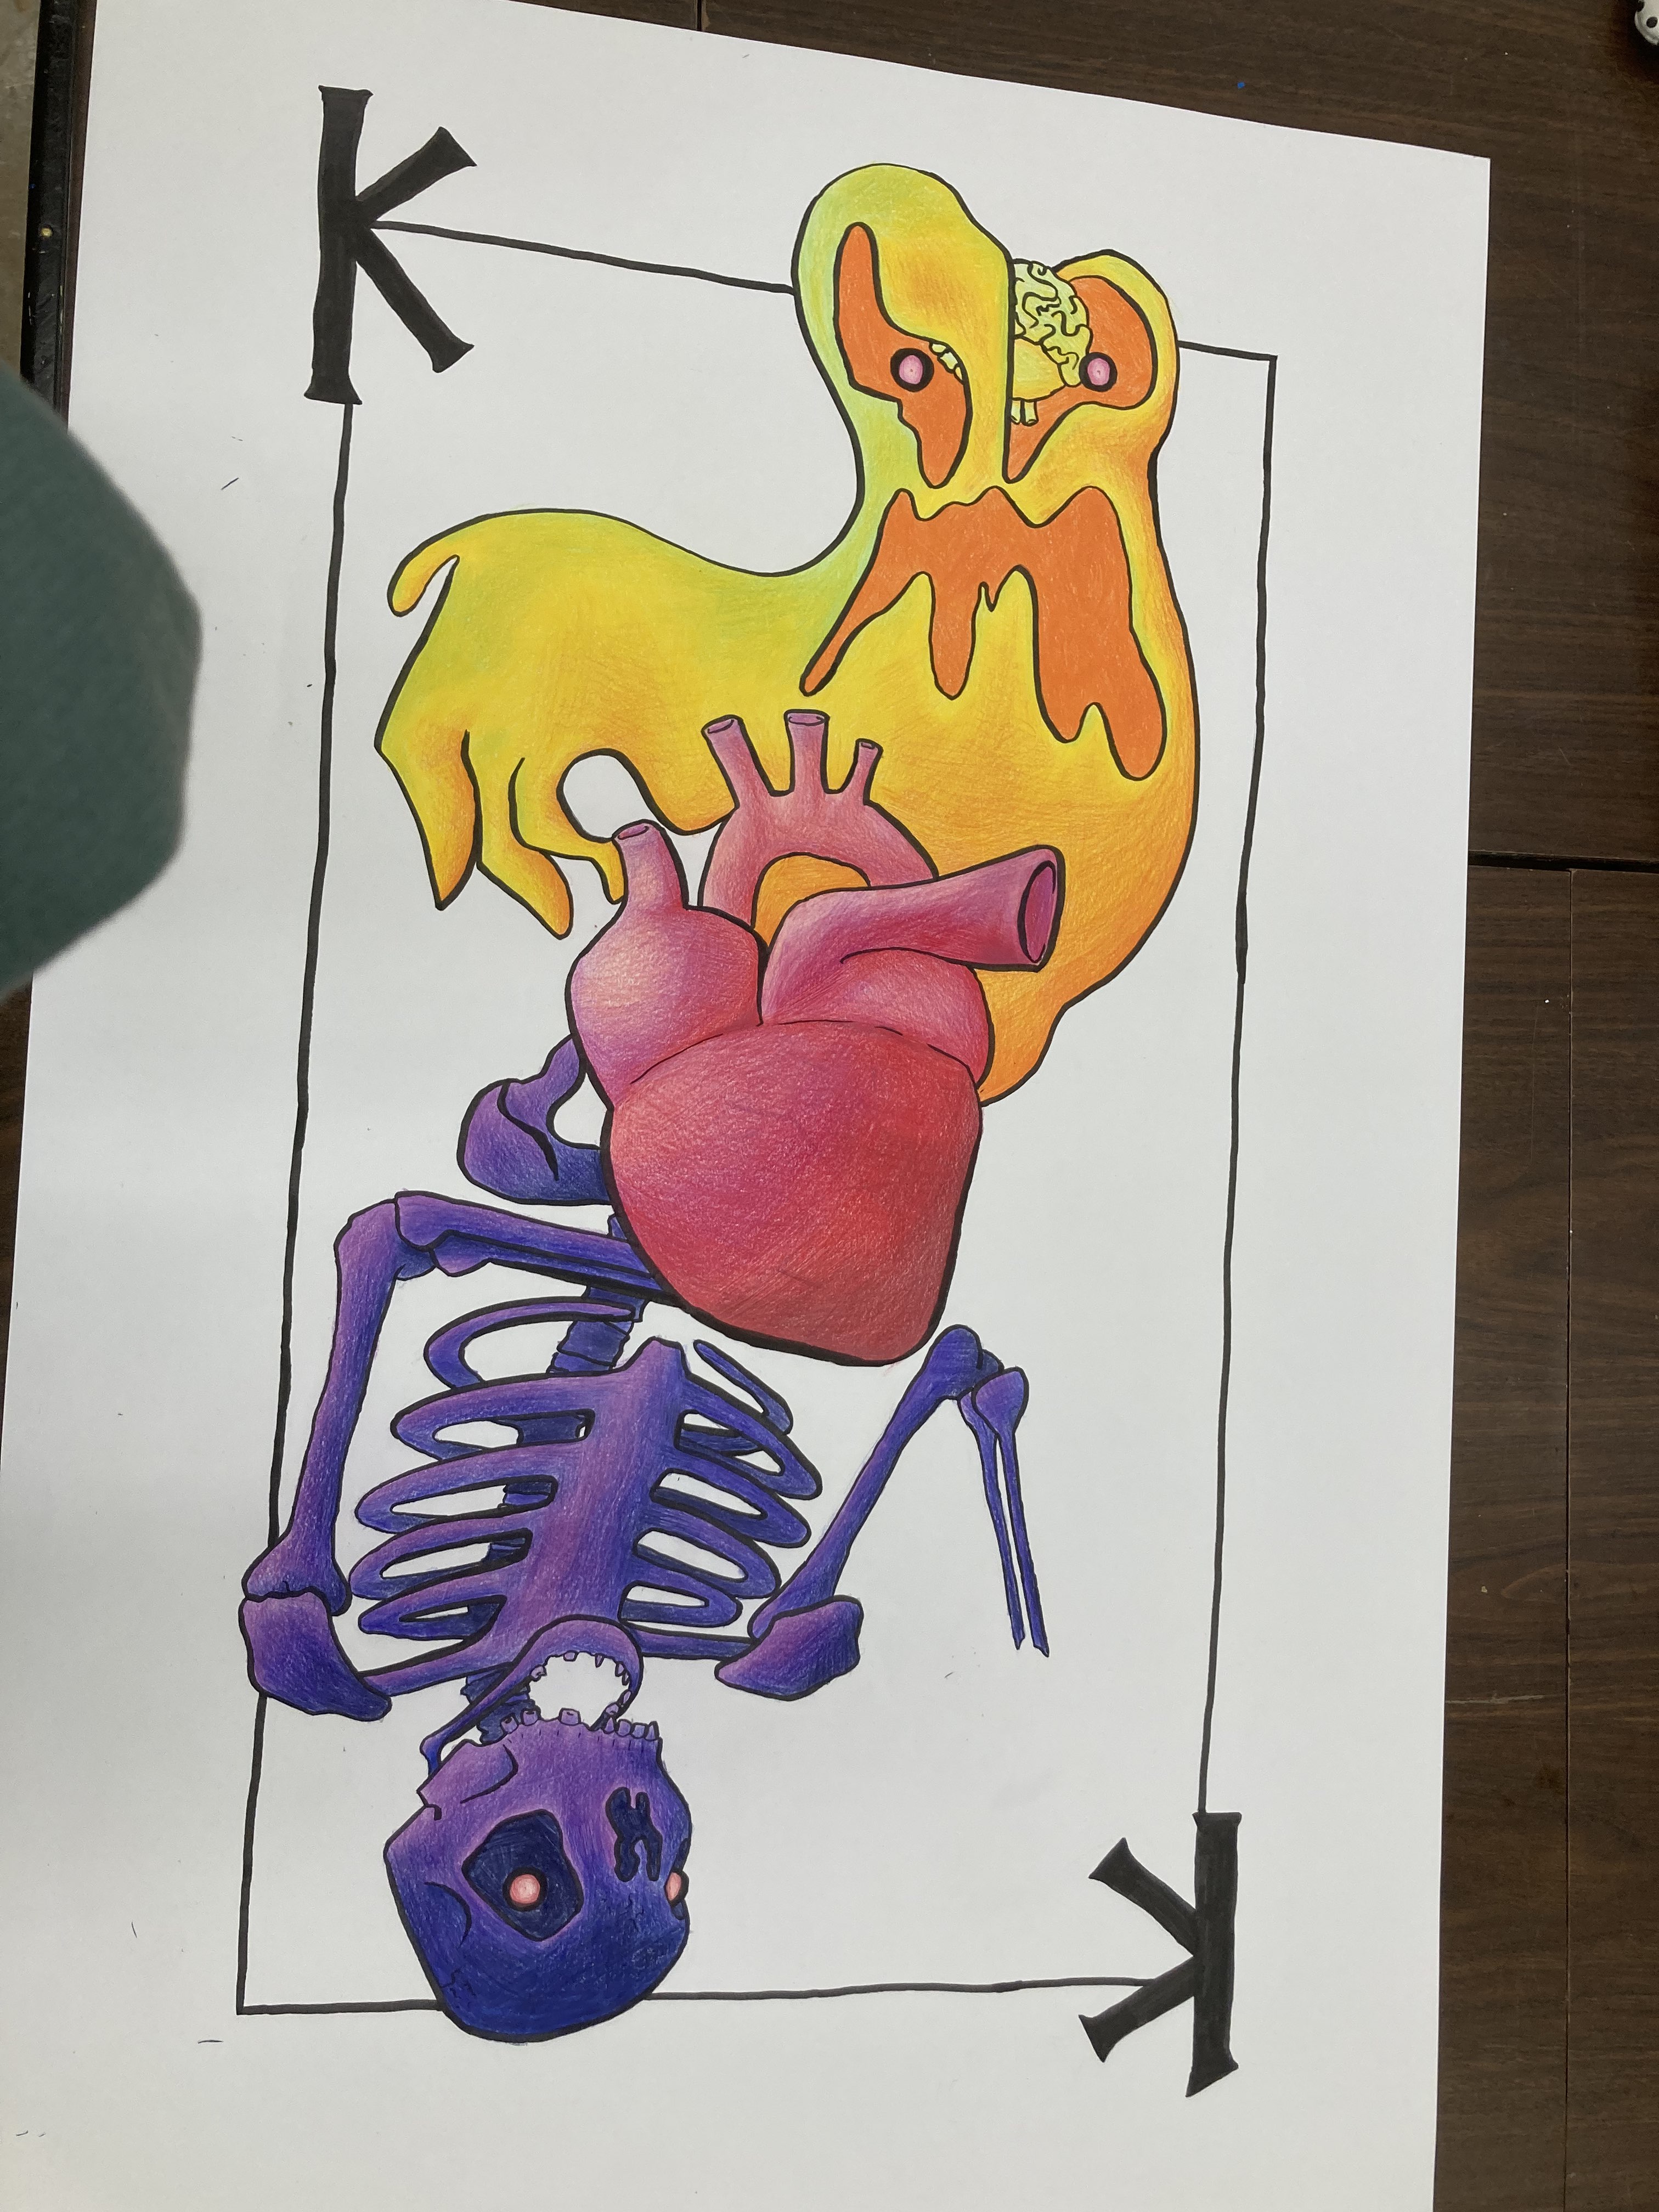 playing card design with blue/purple skeleton and yellow/orange ghost.